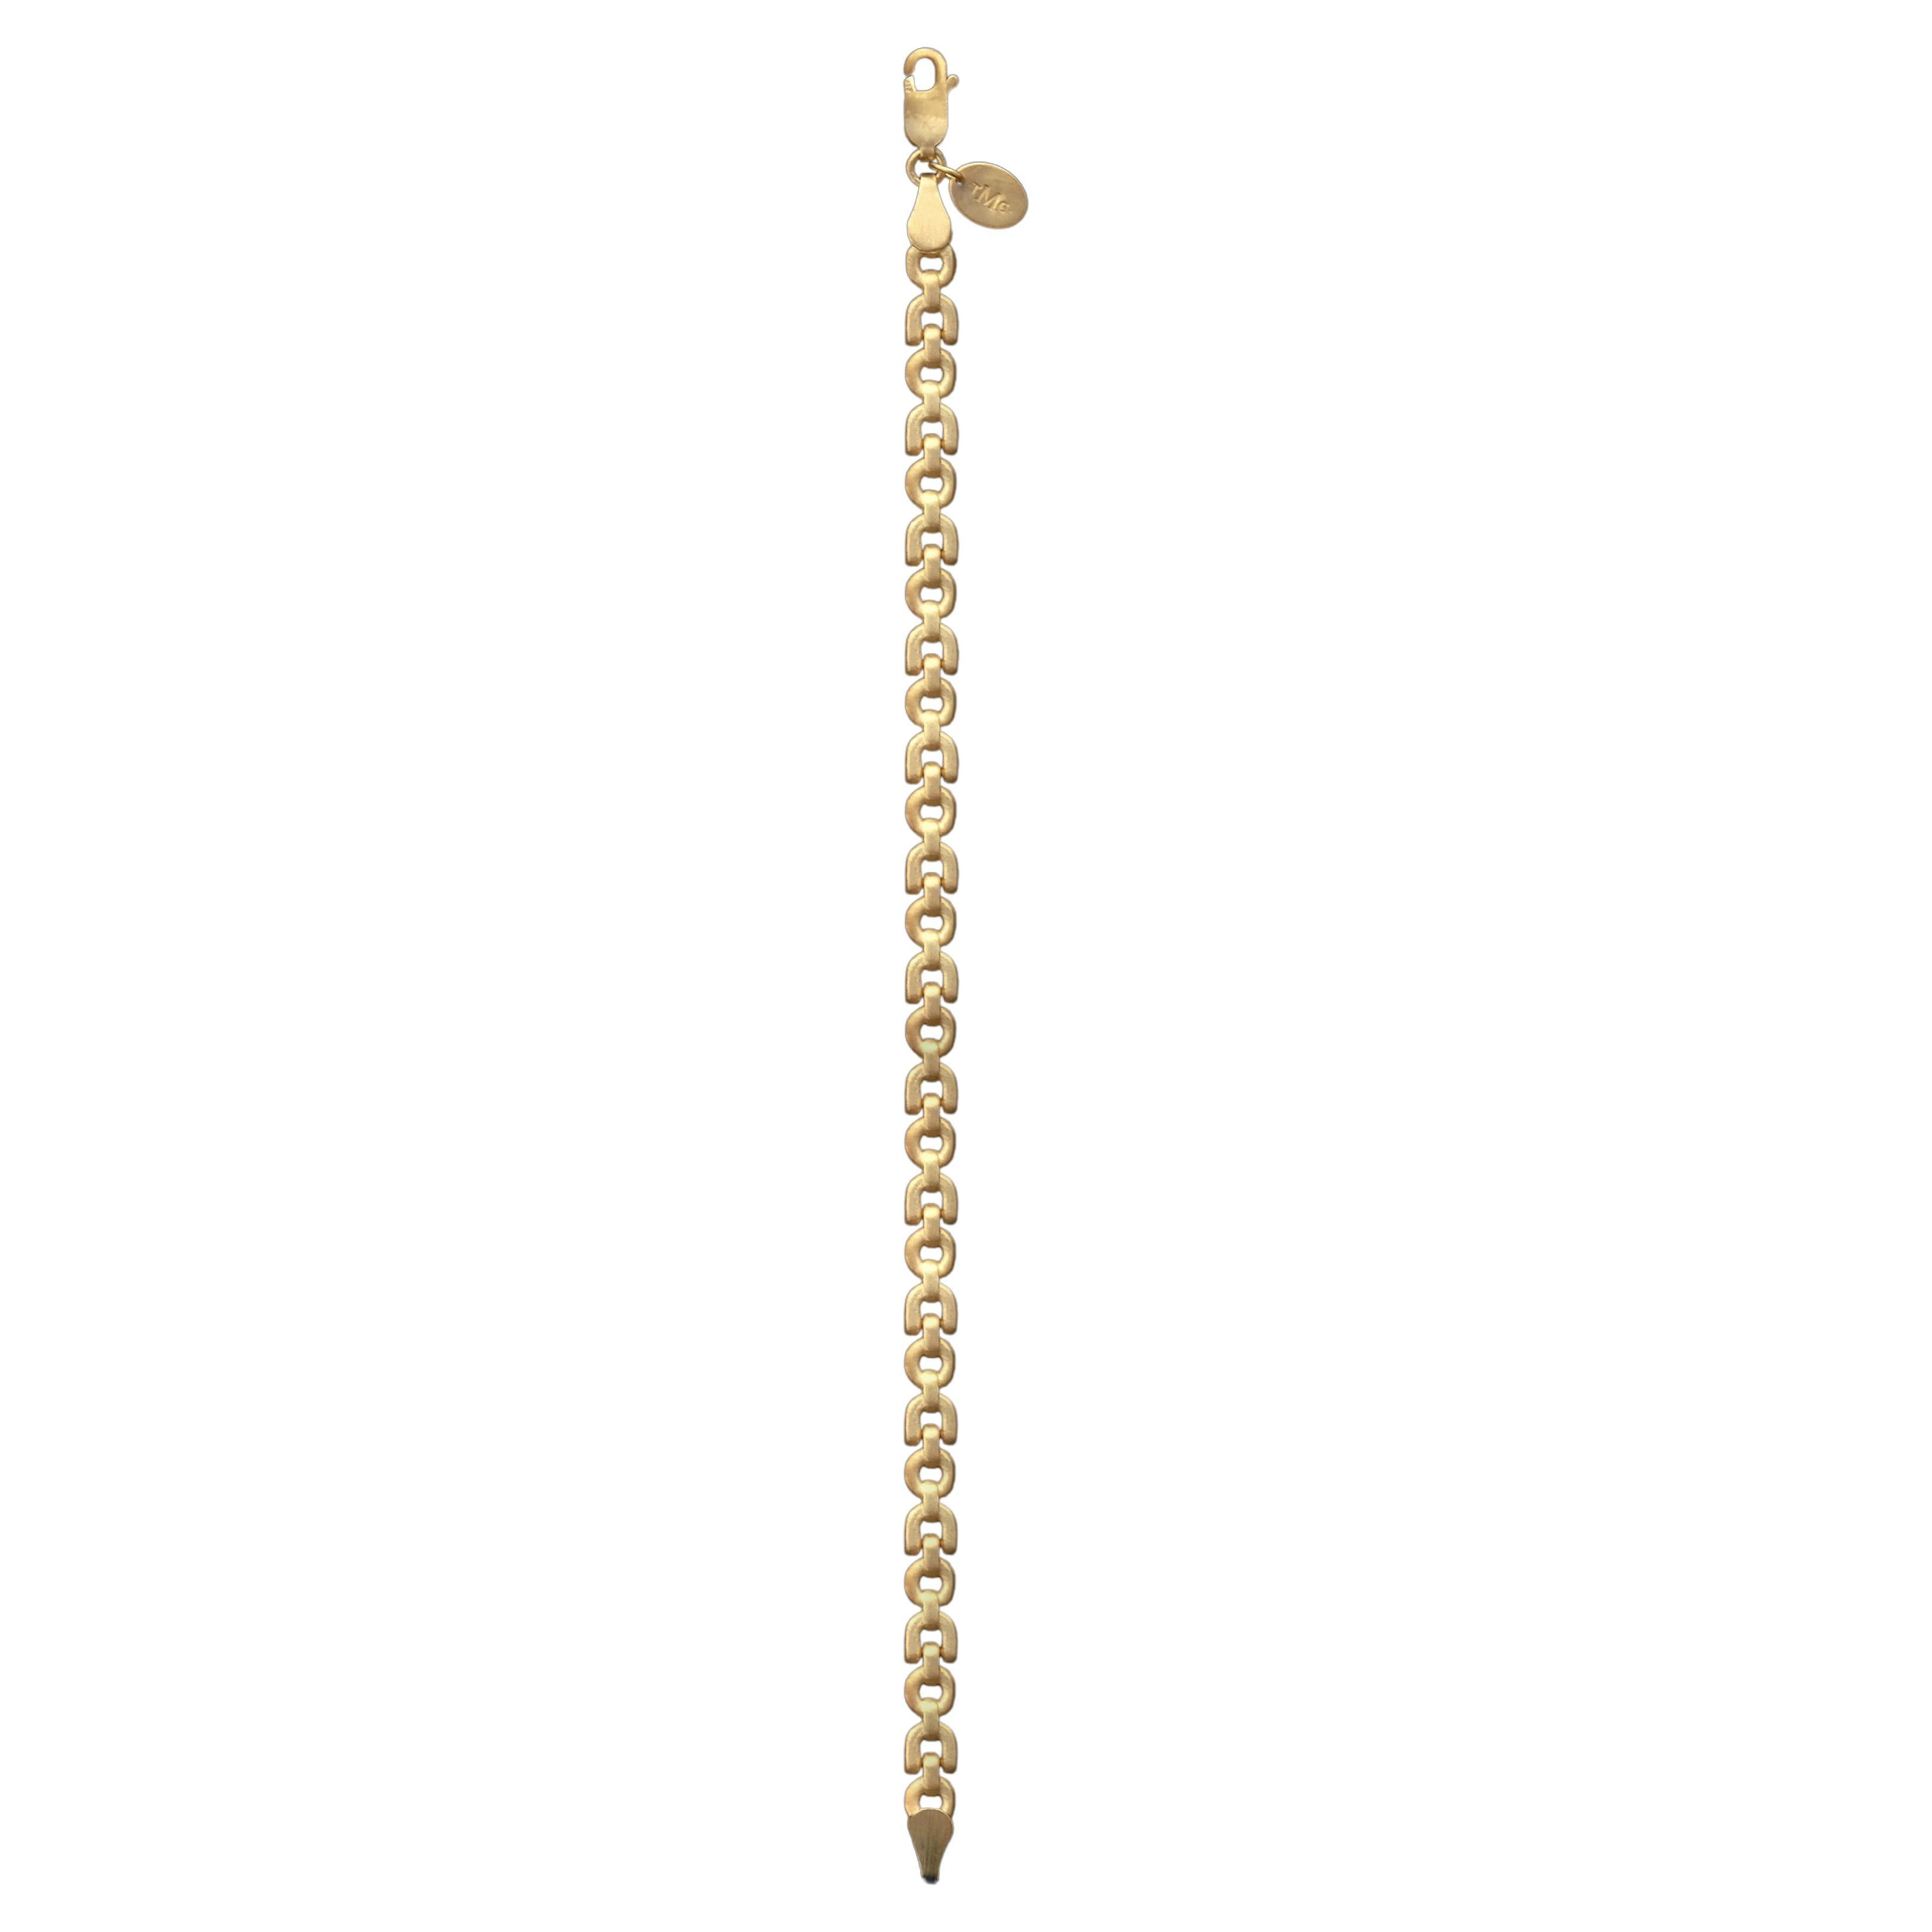 Tiana Marie Combes Yellow Gold Solid Equestrian Chain Link Anklet